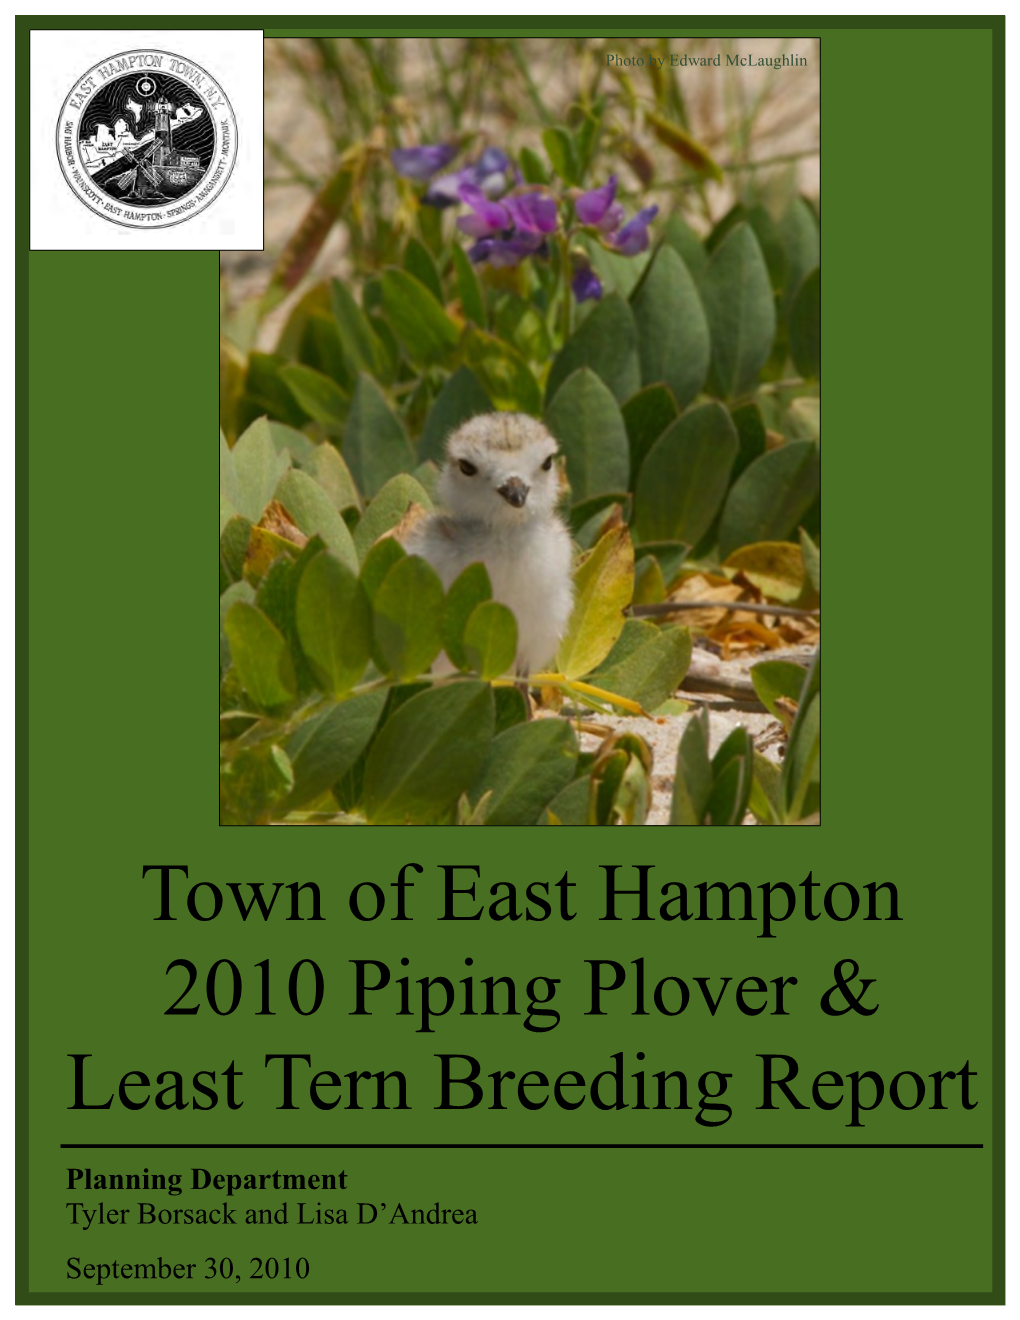 Town of East Hampton 2010 Piping Plover & Least Tern Breeding Report